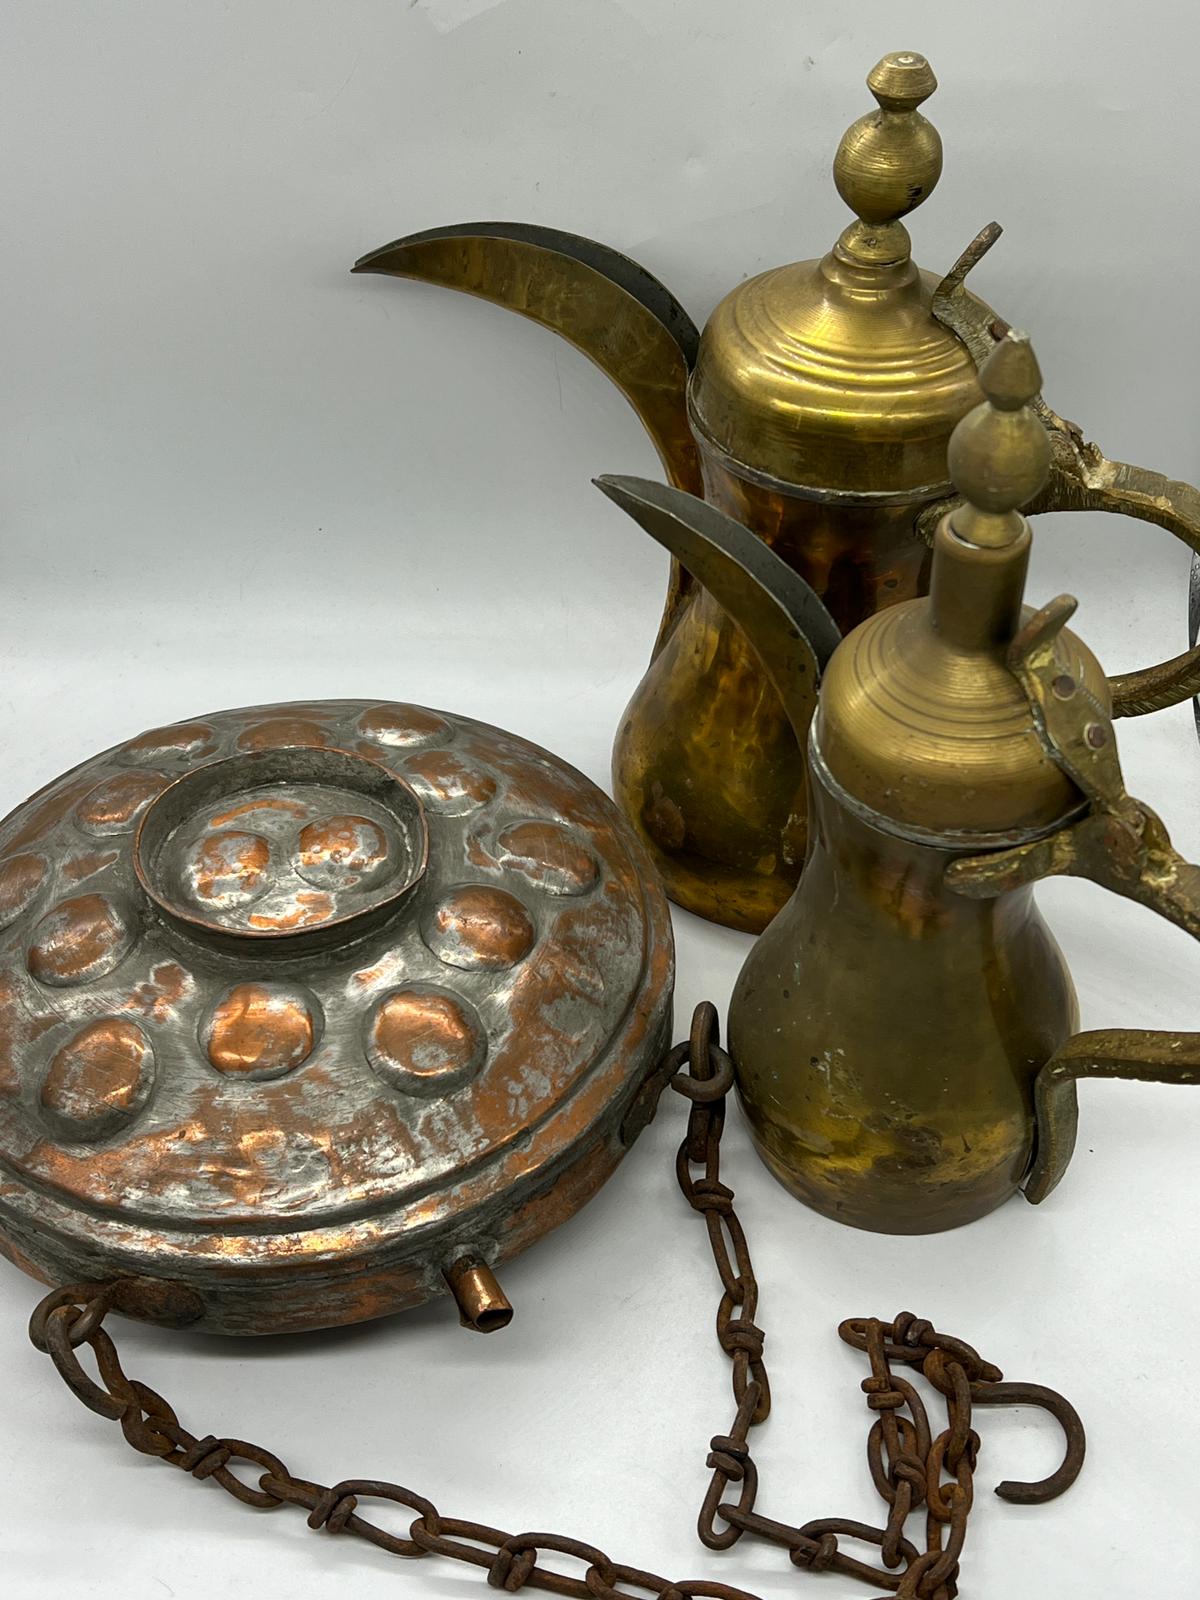 Two Middles Eastern coffee pots and a copper flask/container on a chain - Image 2 of 4